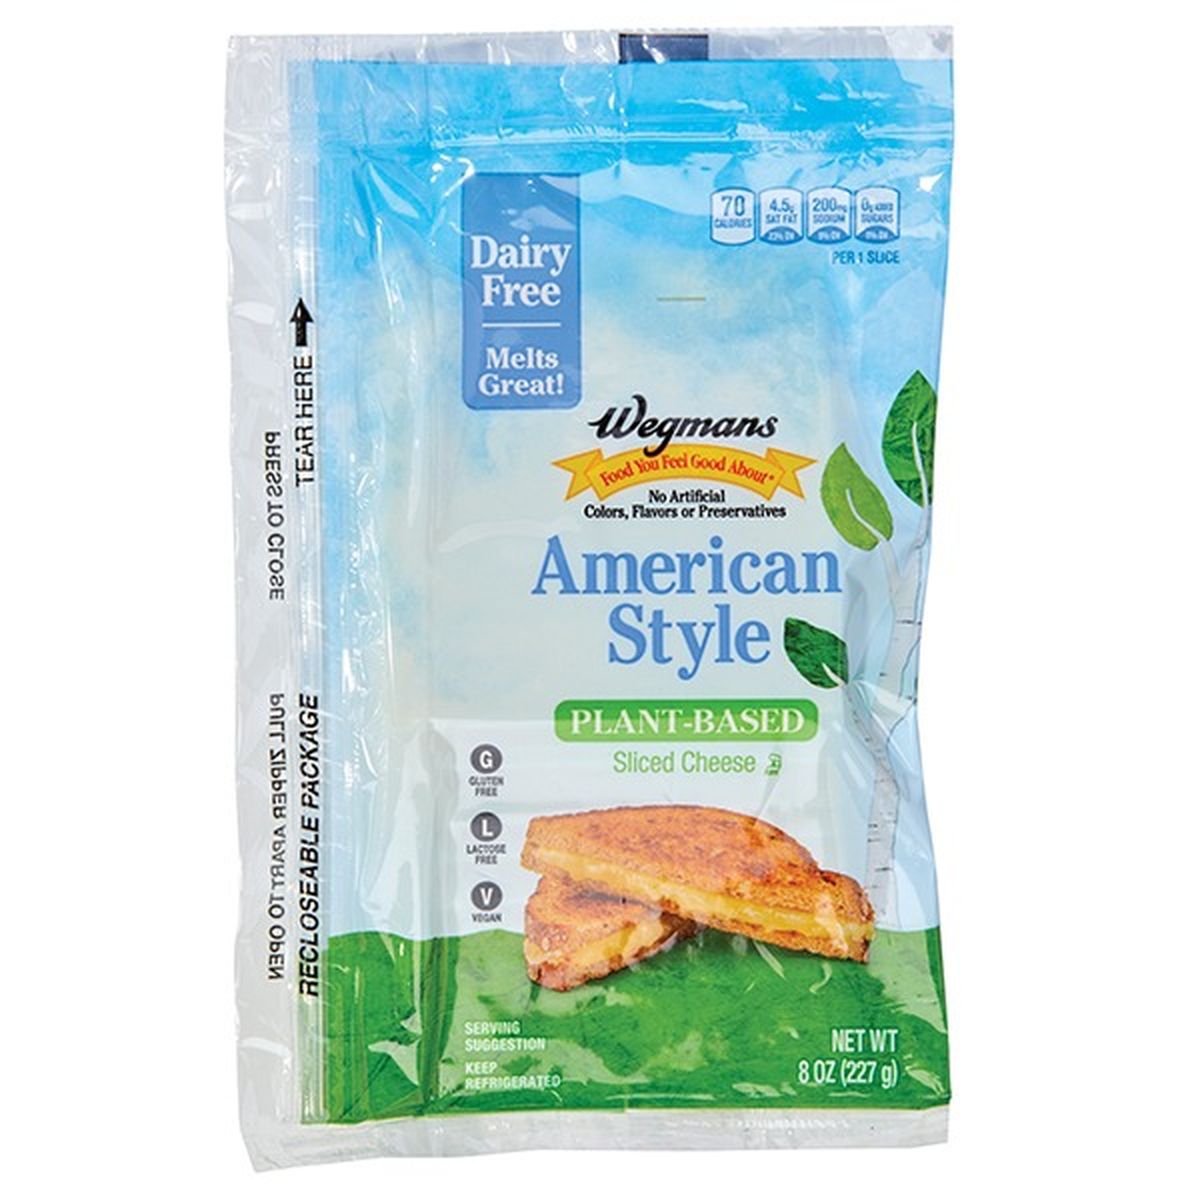 Calories in Wegmans American Style Plant Based Sliced Cheese